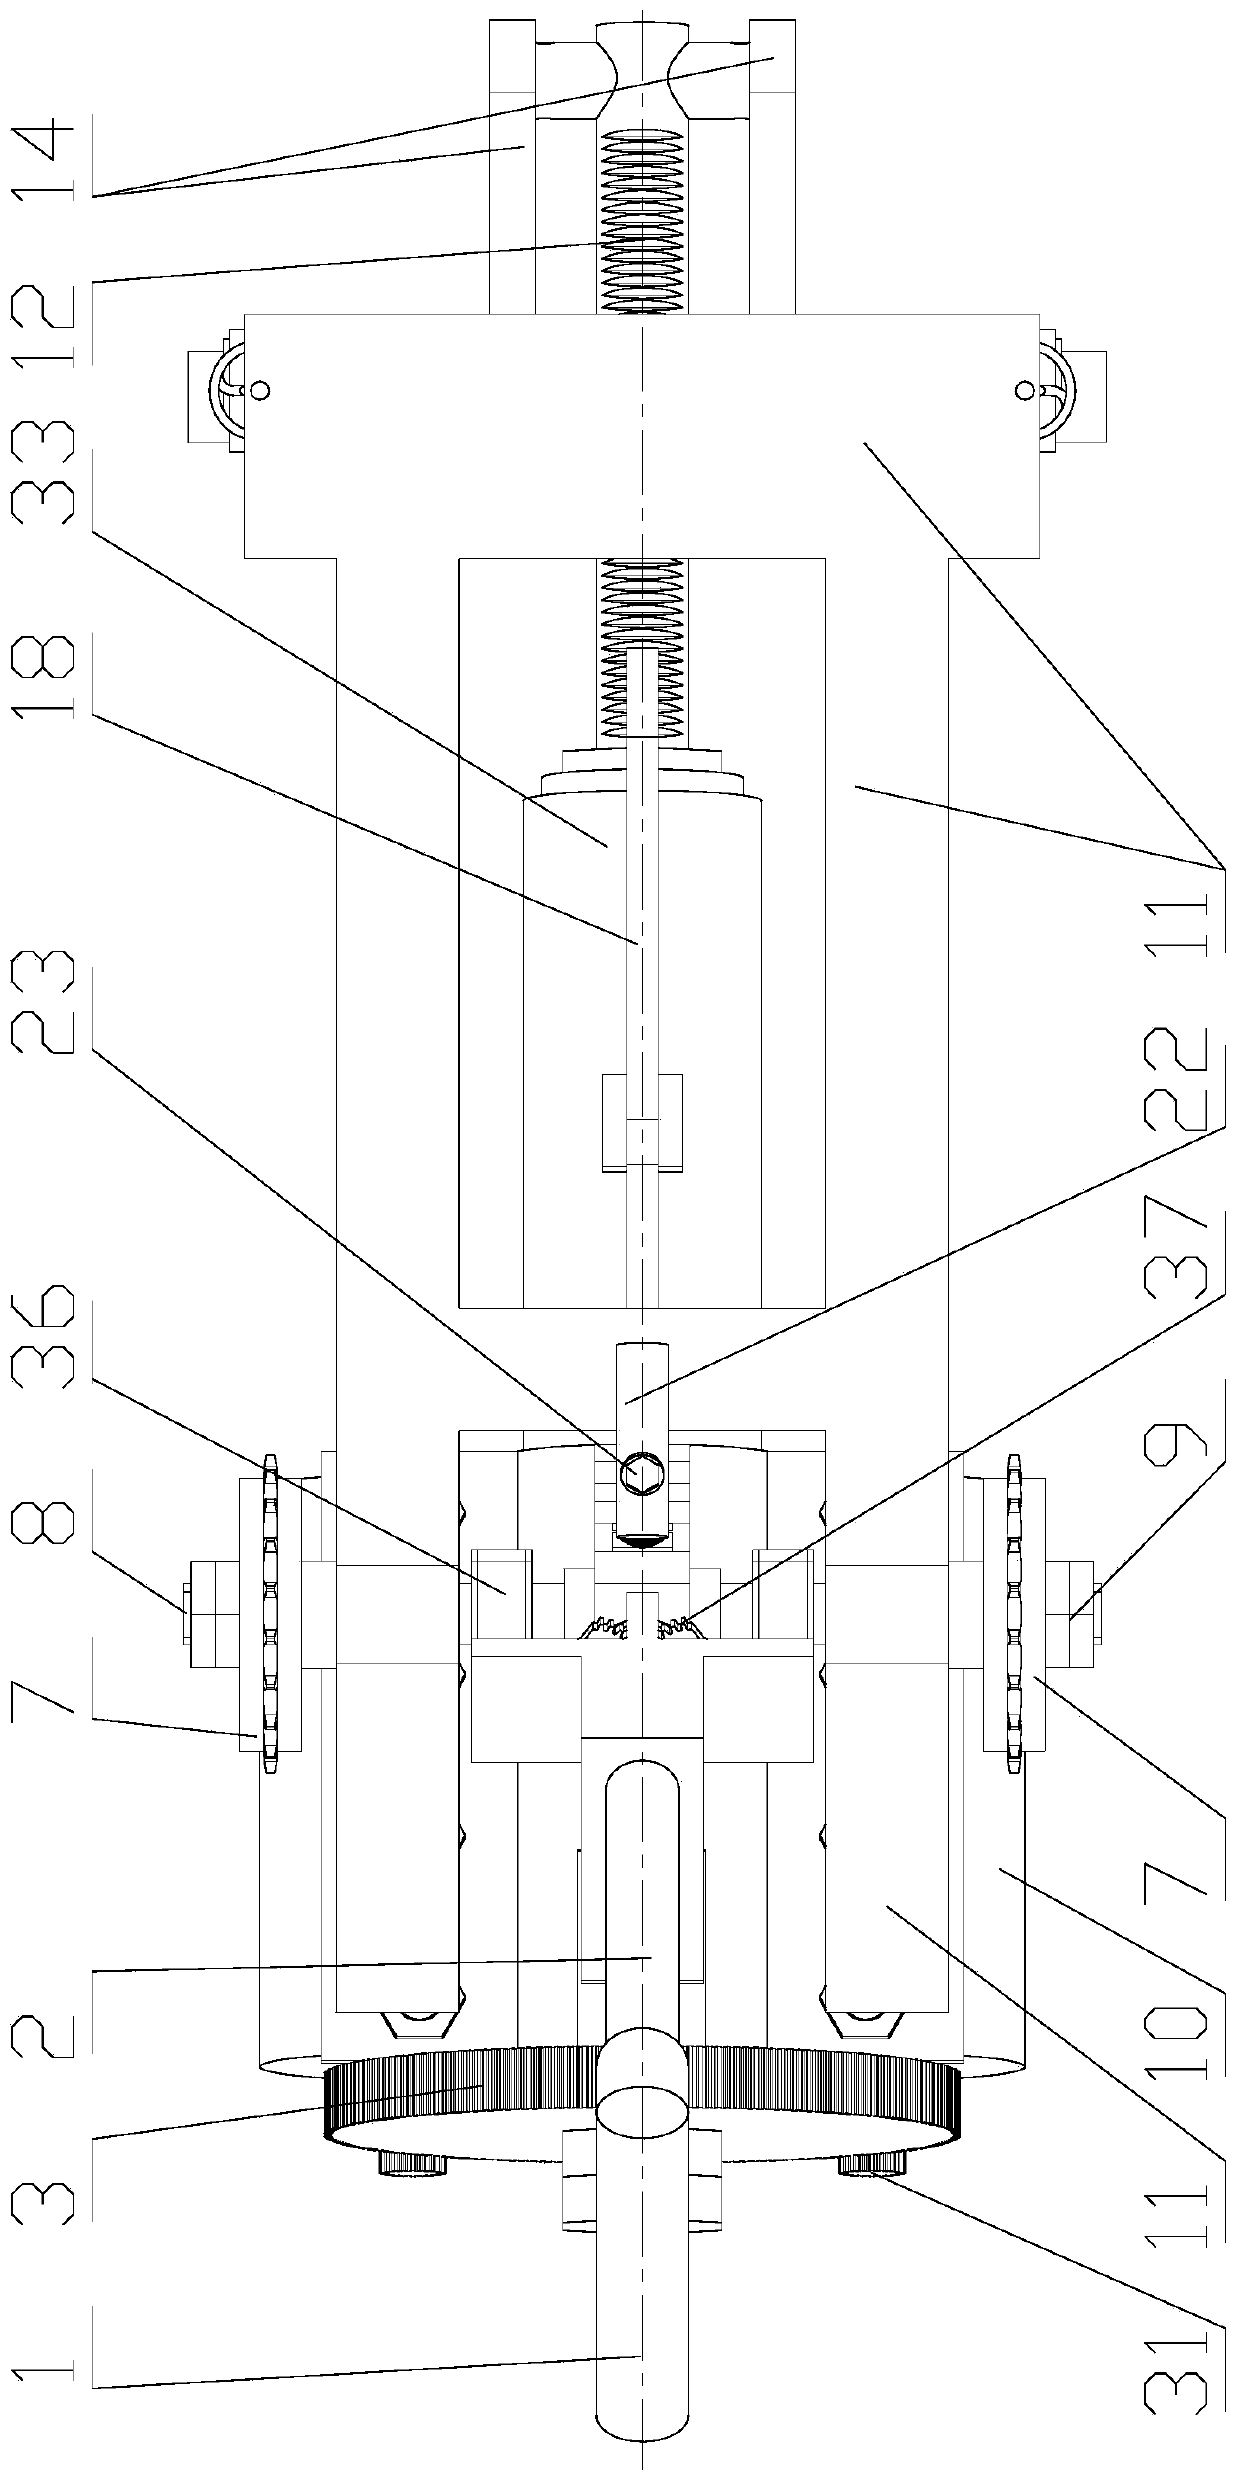 Manual and electric dual-purpose omni-directional moving opposite-wheel control mechanism of carrier mobile equipment